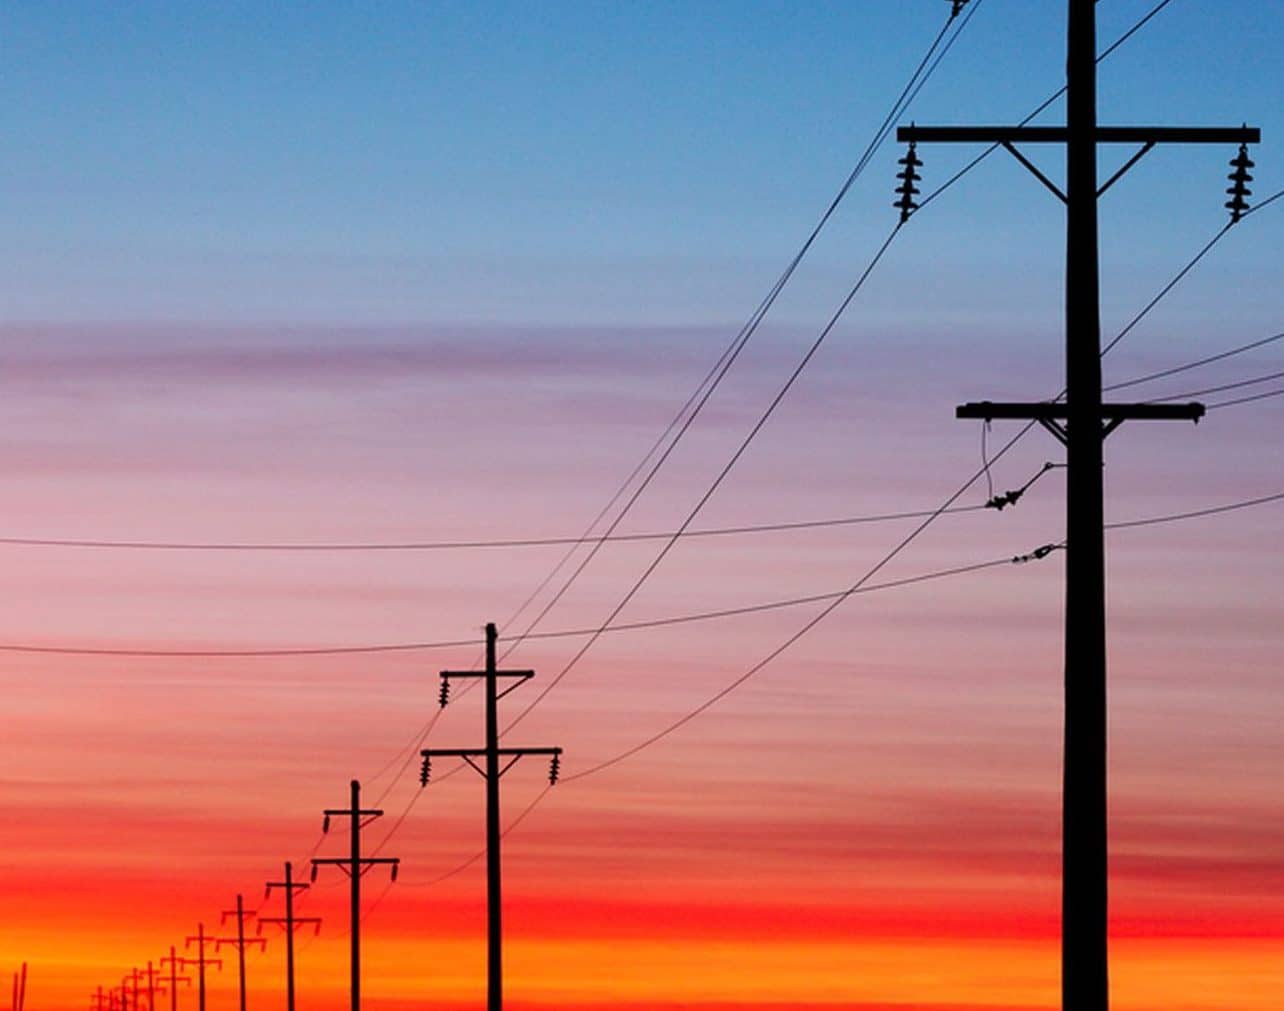 Sunset and electric poles